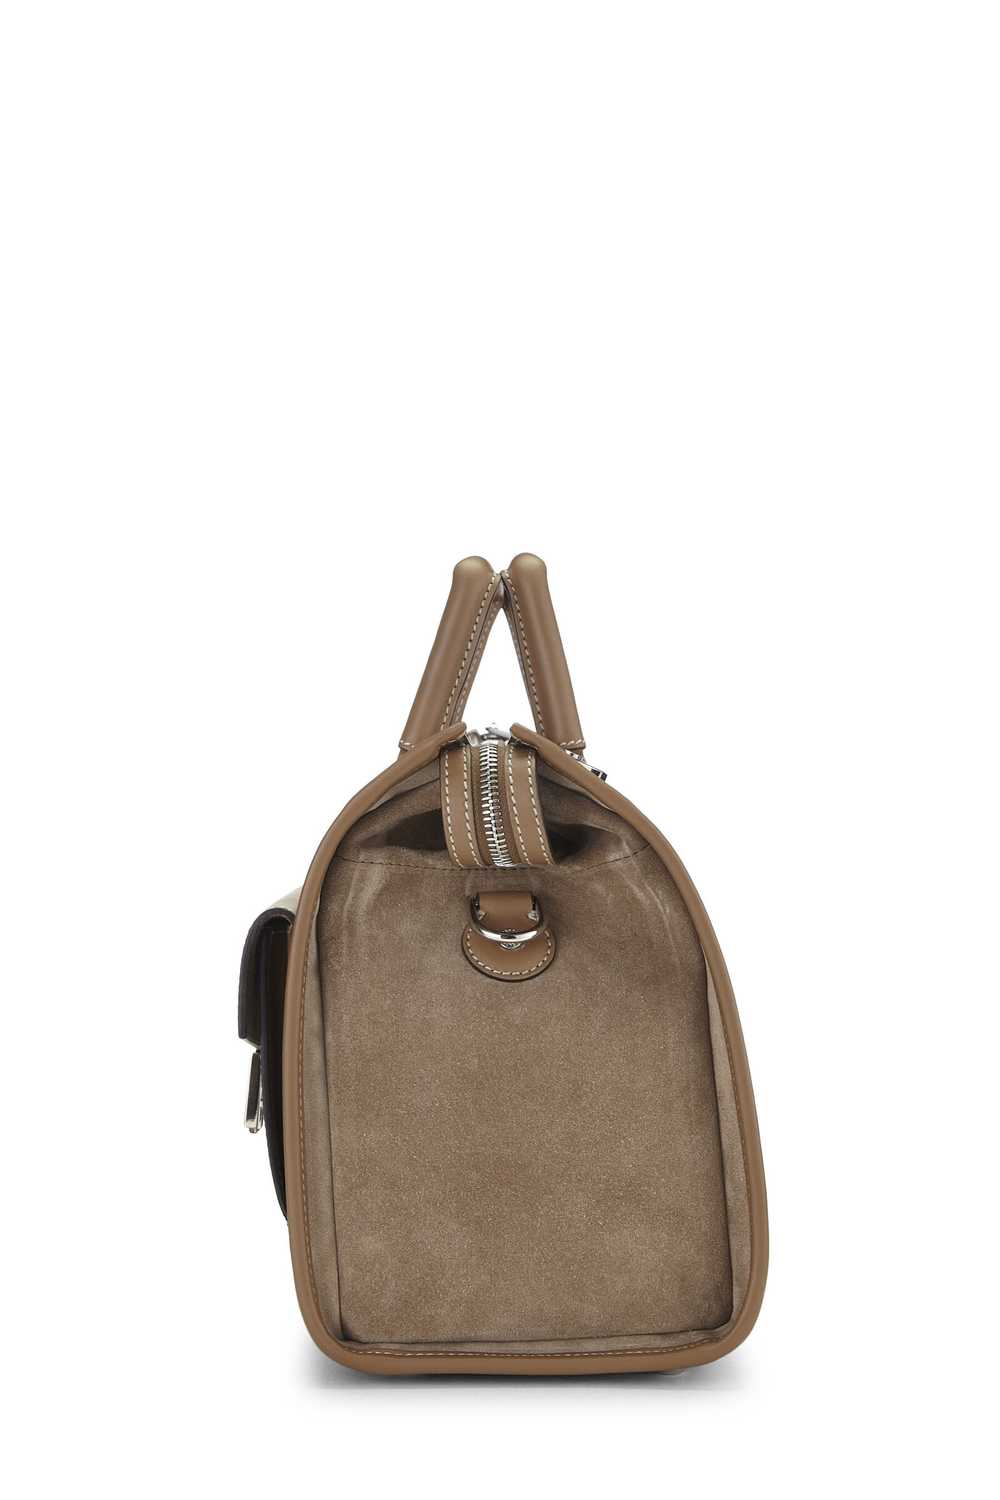 Brown Zucca Leather Soft Trunk Handle Bag - image 3